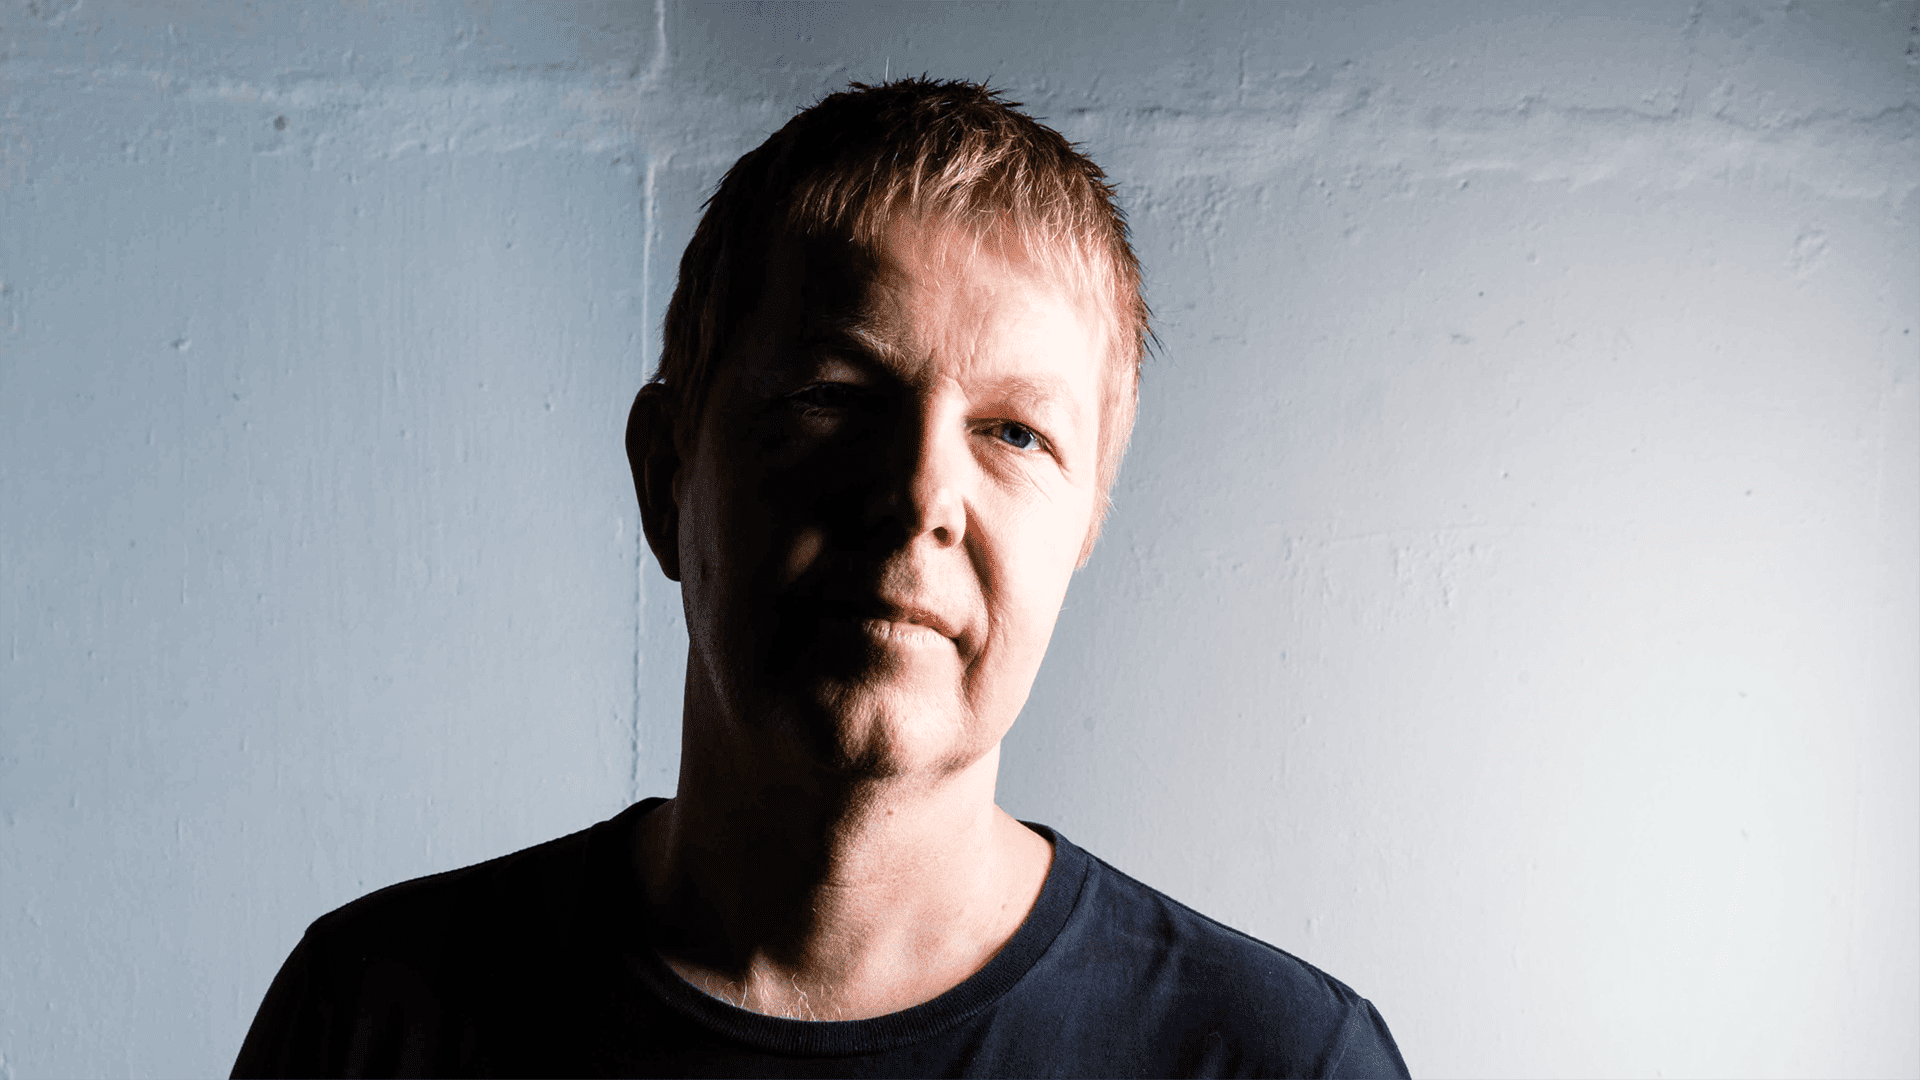 John Digweed drops a commemorative new 'Live In London' mix: Listen